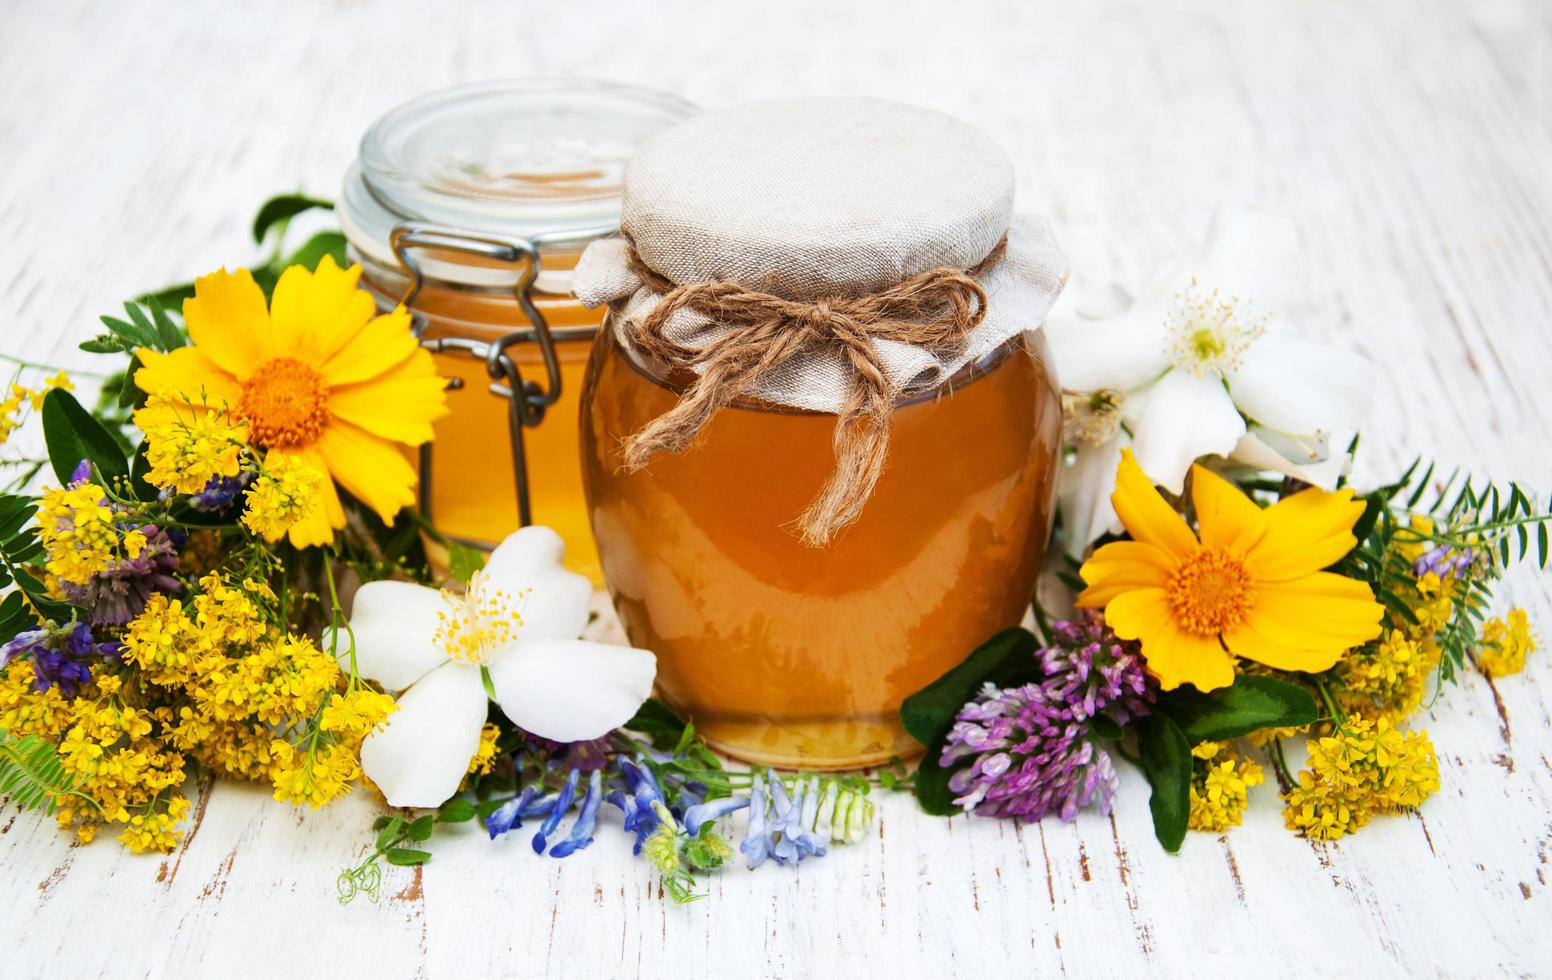 Honey and wild flowers on a wooden background photo